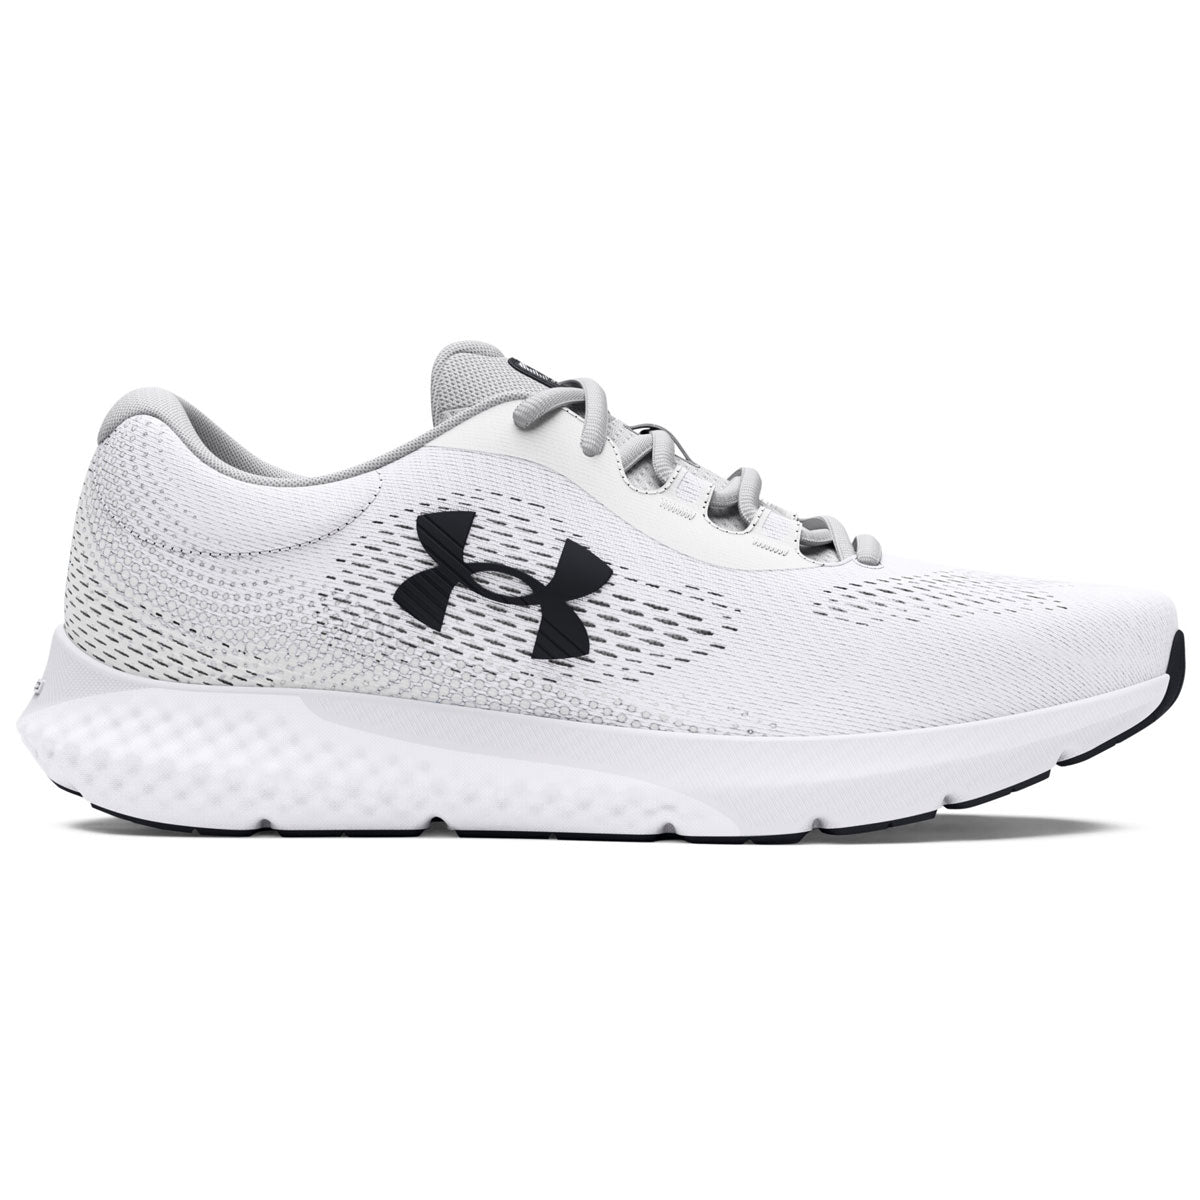 Under Armour Charged Rogue 4 Running Shoes - Mens - White/Black